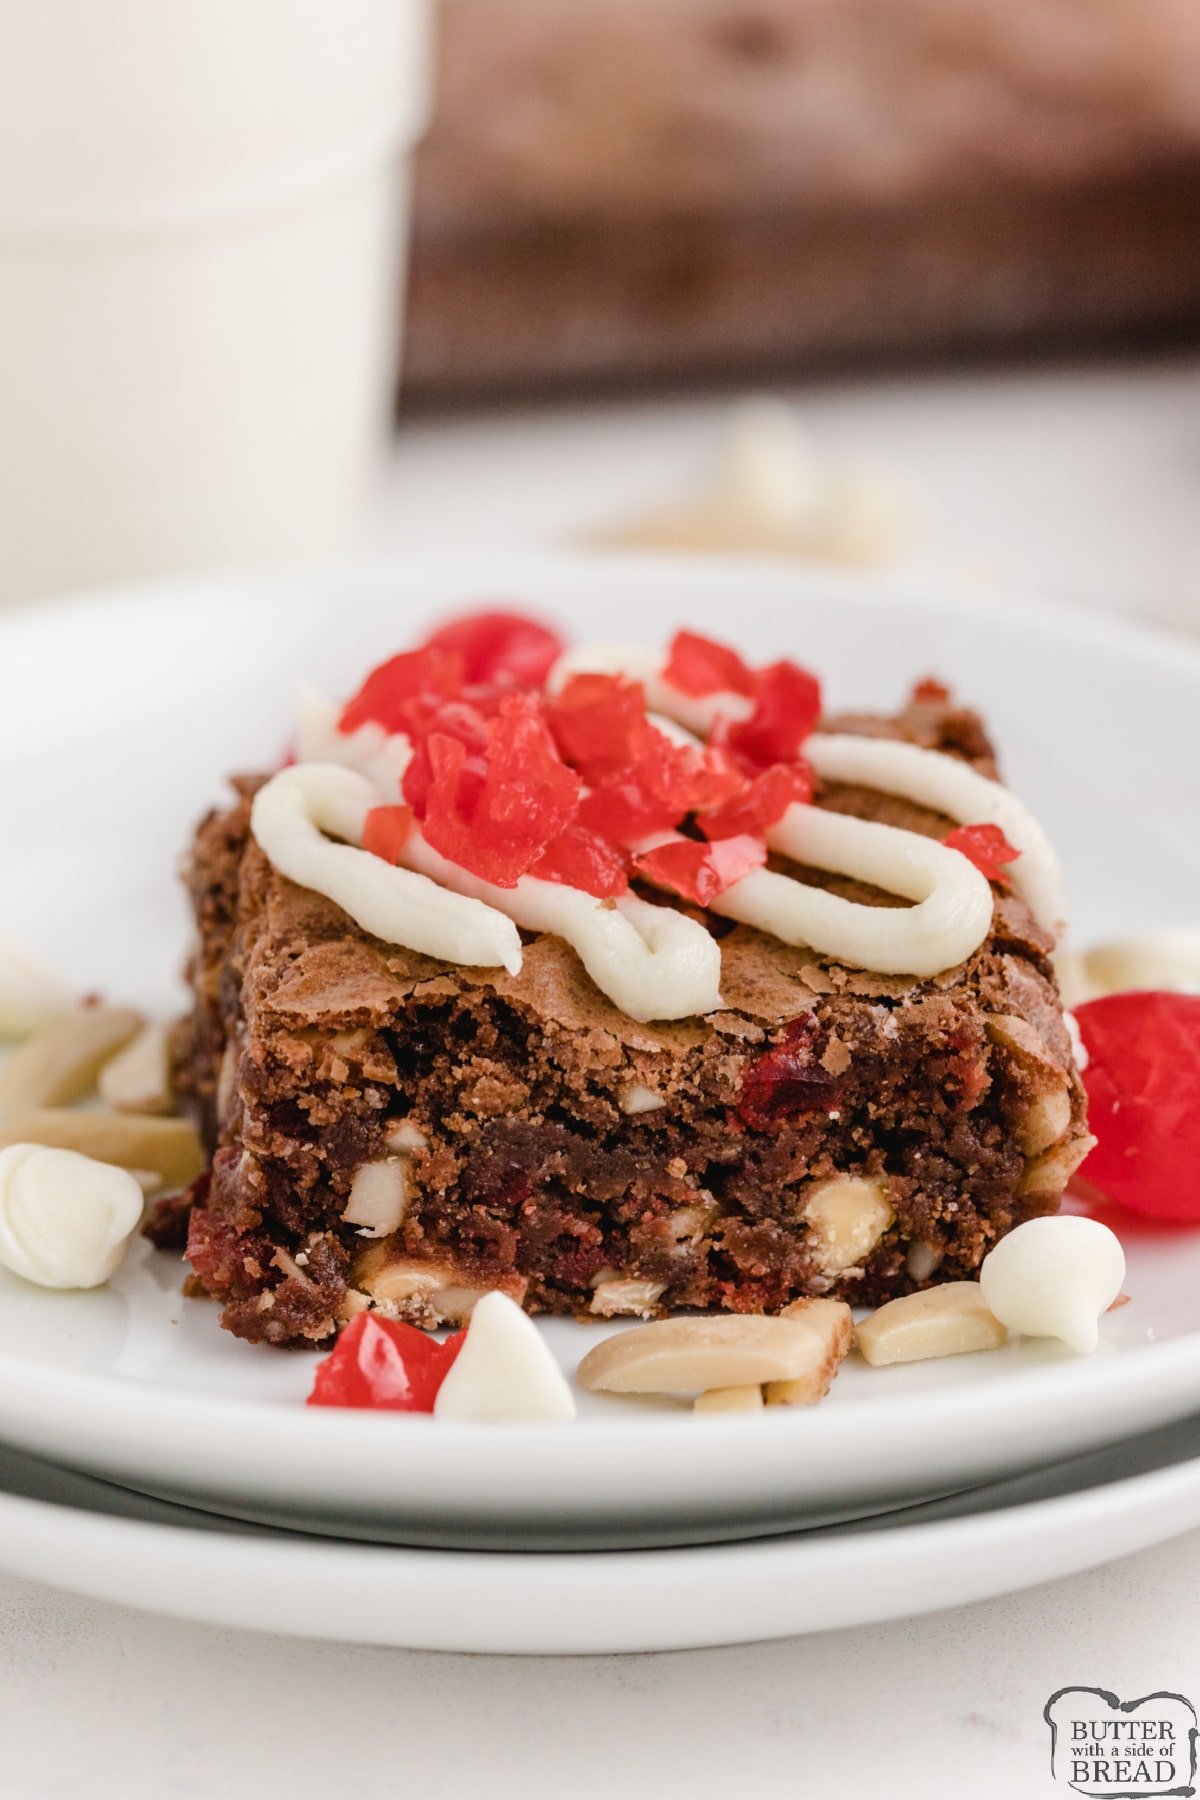 Black Forest Brownies made with a delicious, from-scratch brownie recipe that is mixed with white chocolate chips, chopped cherries and slivered almonds. The brownies are then topped with a cream cheese frosting and more cherries!